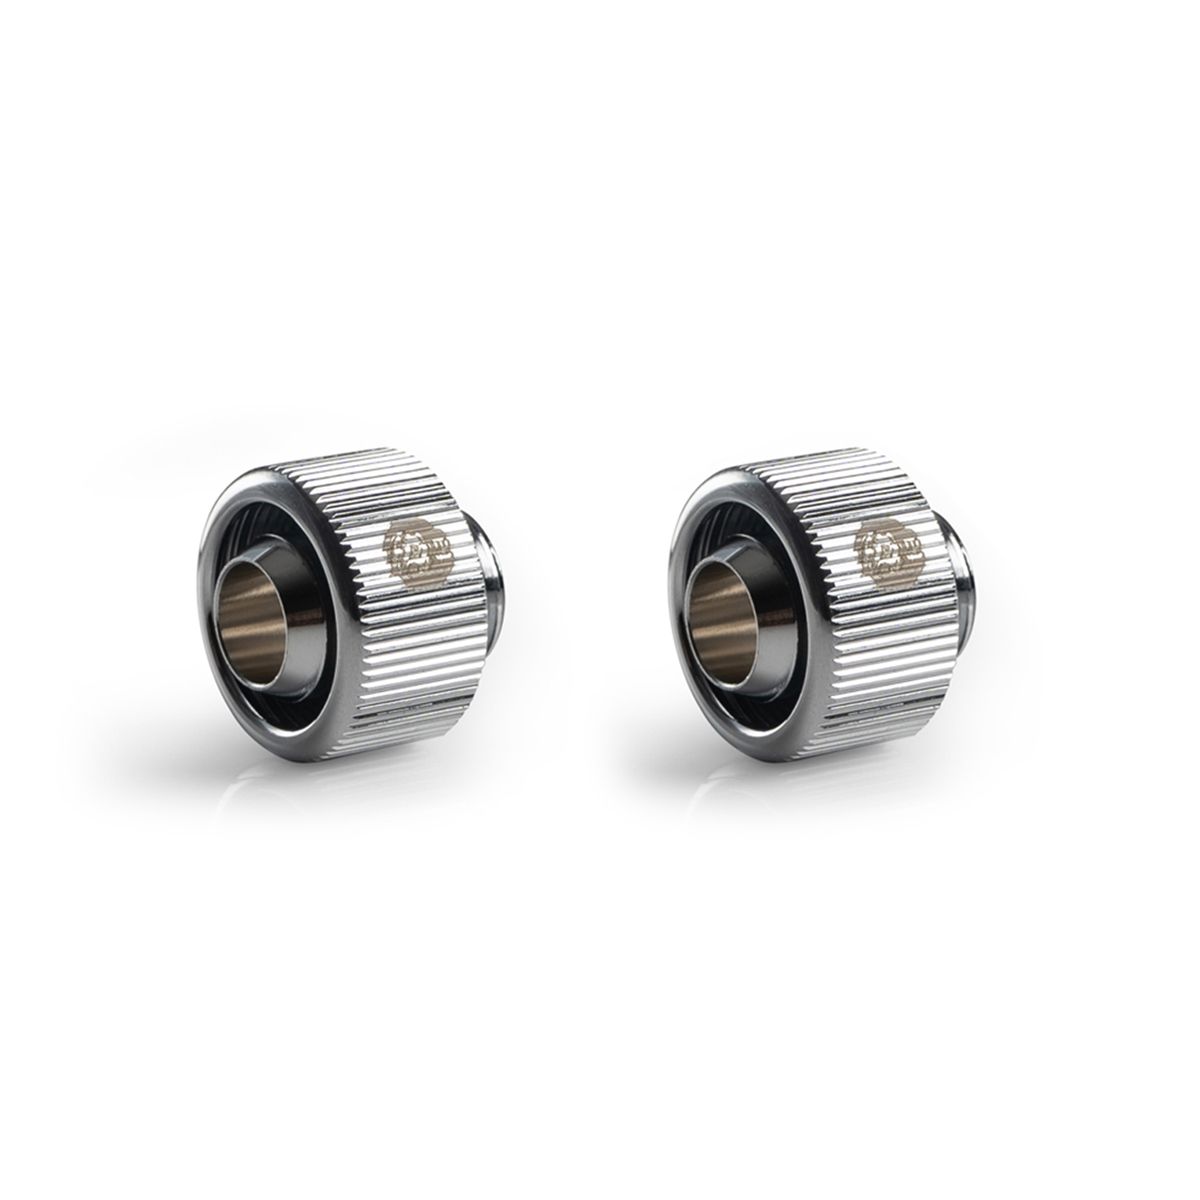 OD 5//8 OD Compression Fitting for Soft Tubing CC3 Ultimate Silver Shining Bitspower G1//4 to 3//8 ID 4-Pack